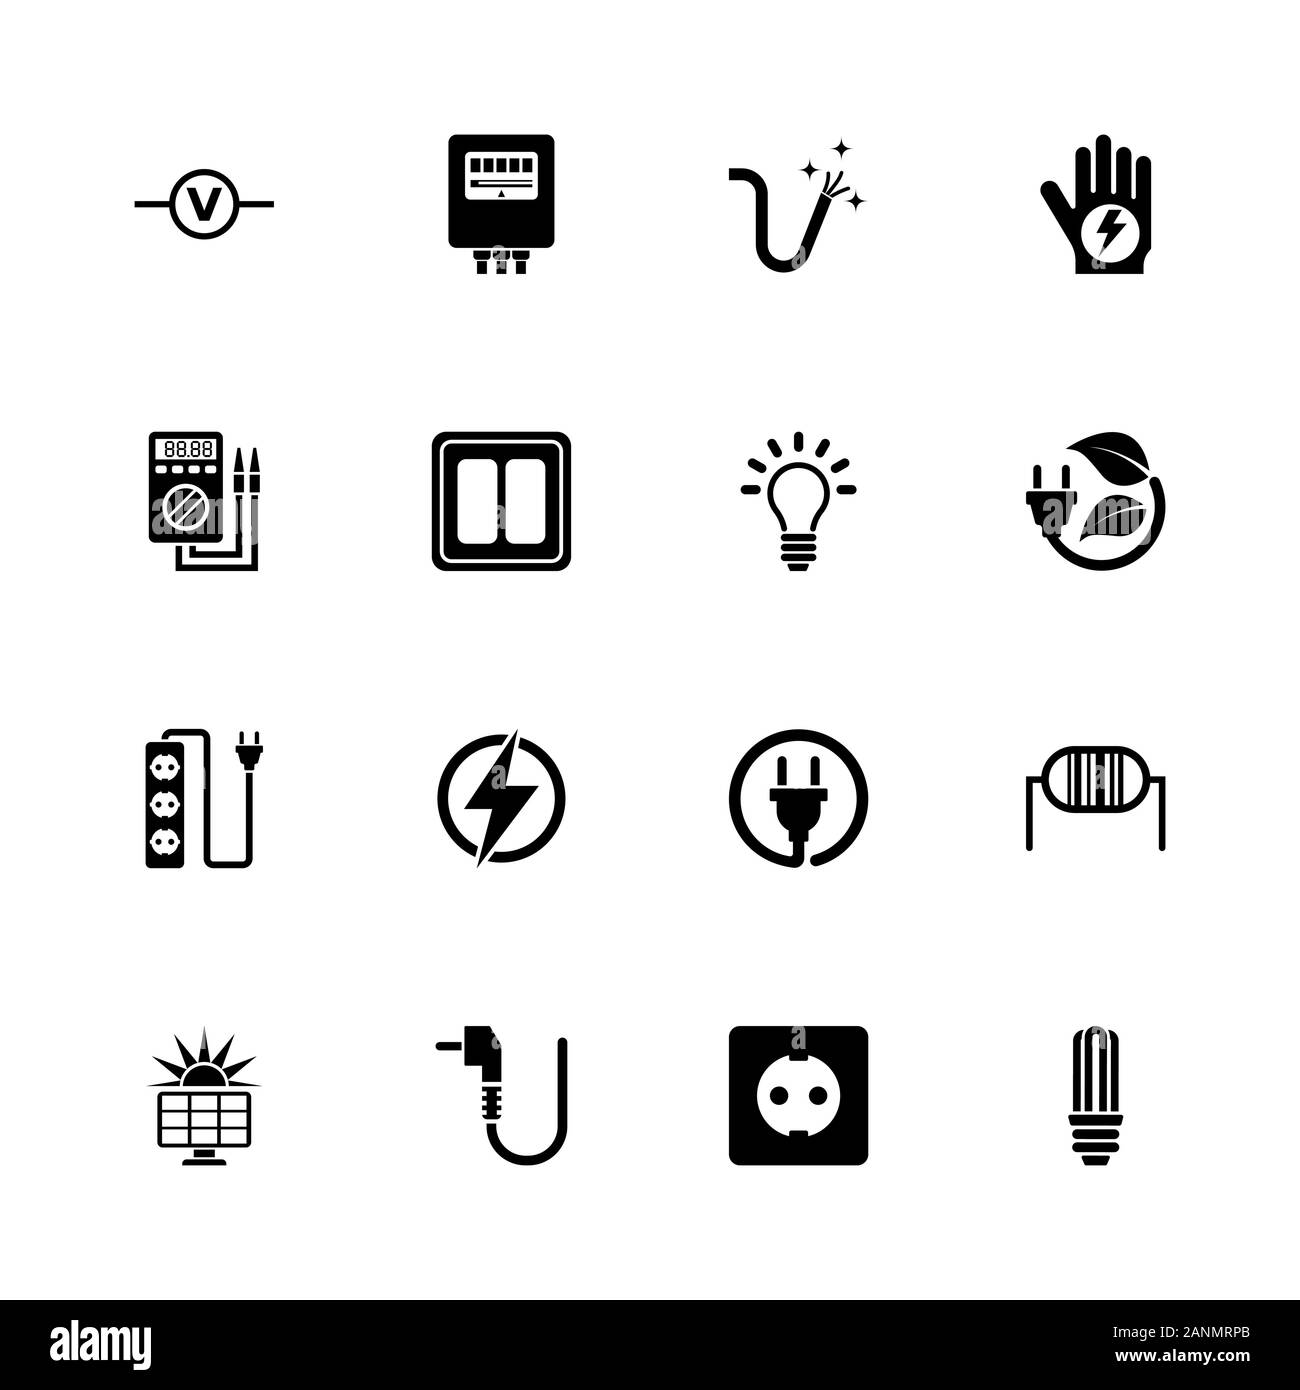 Electricity icons - Expand to any size - Change to any colour. Flat Vector Icons - Black Illustration on White Background. Stock Vector